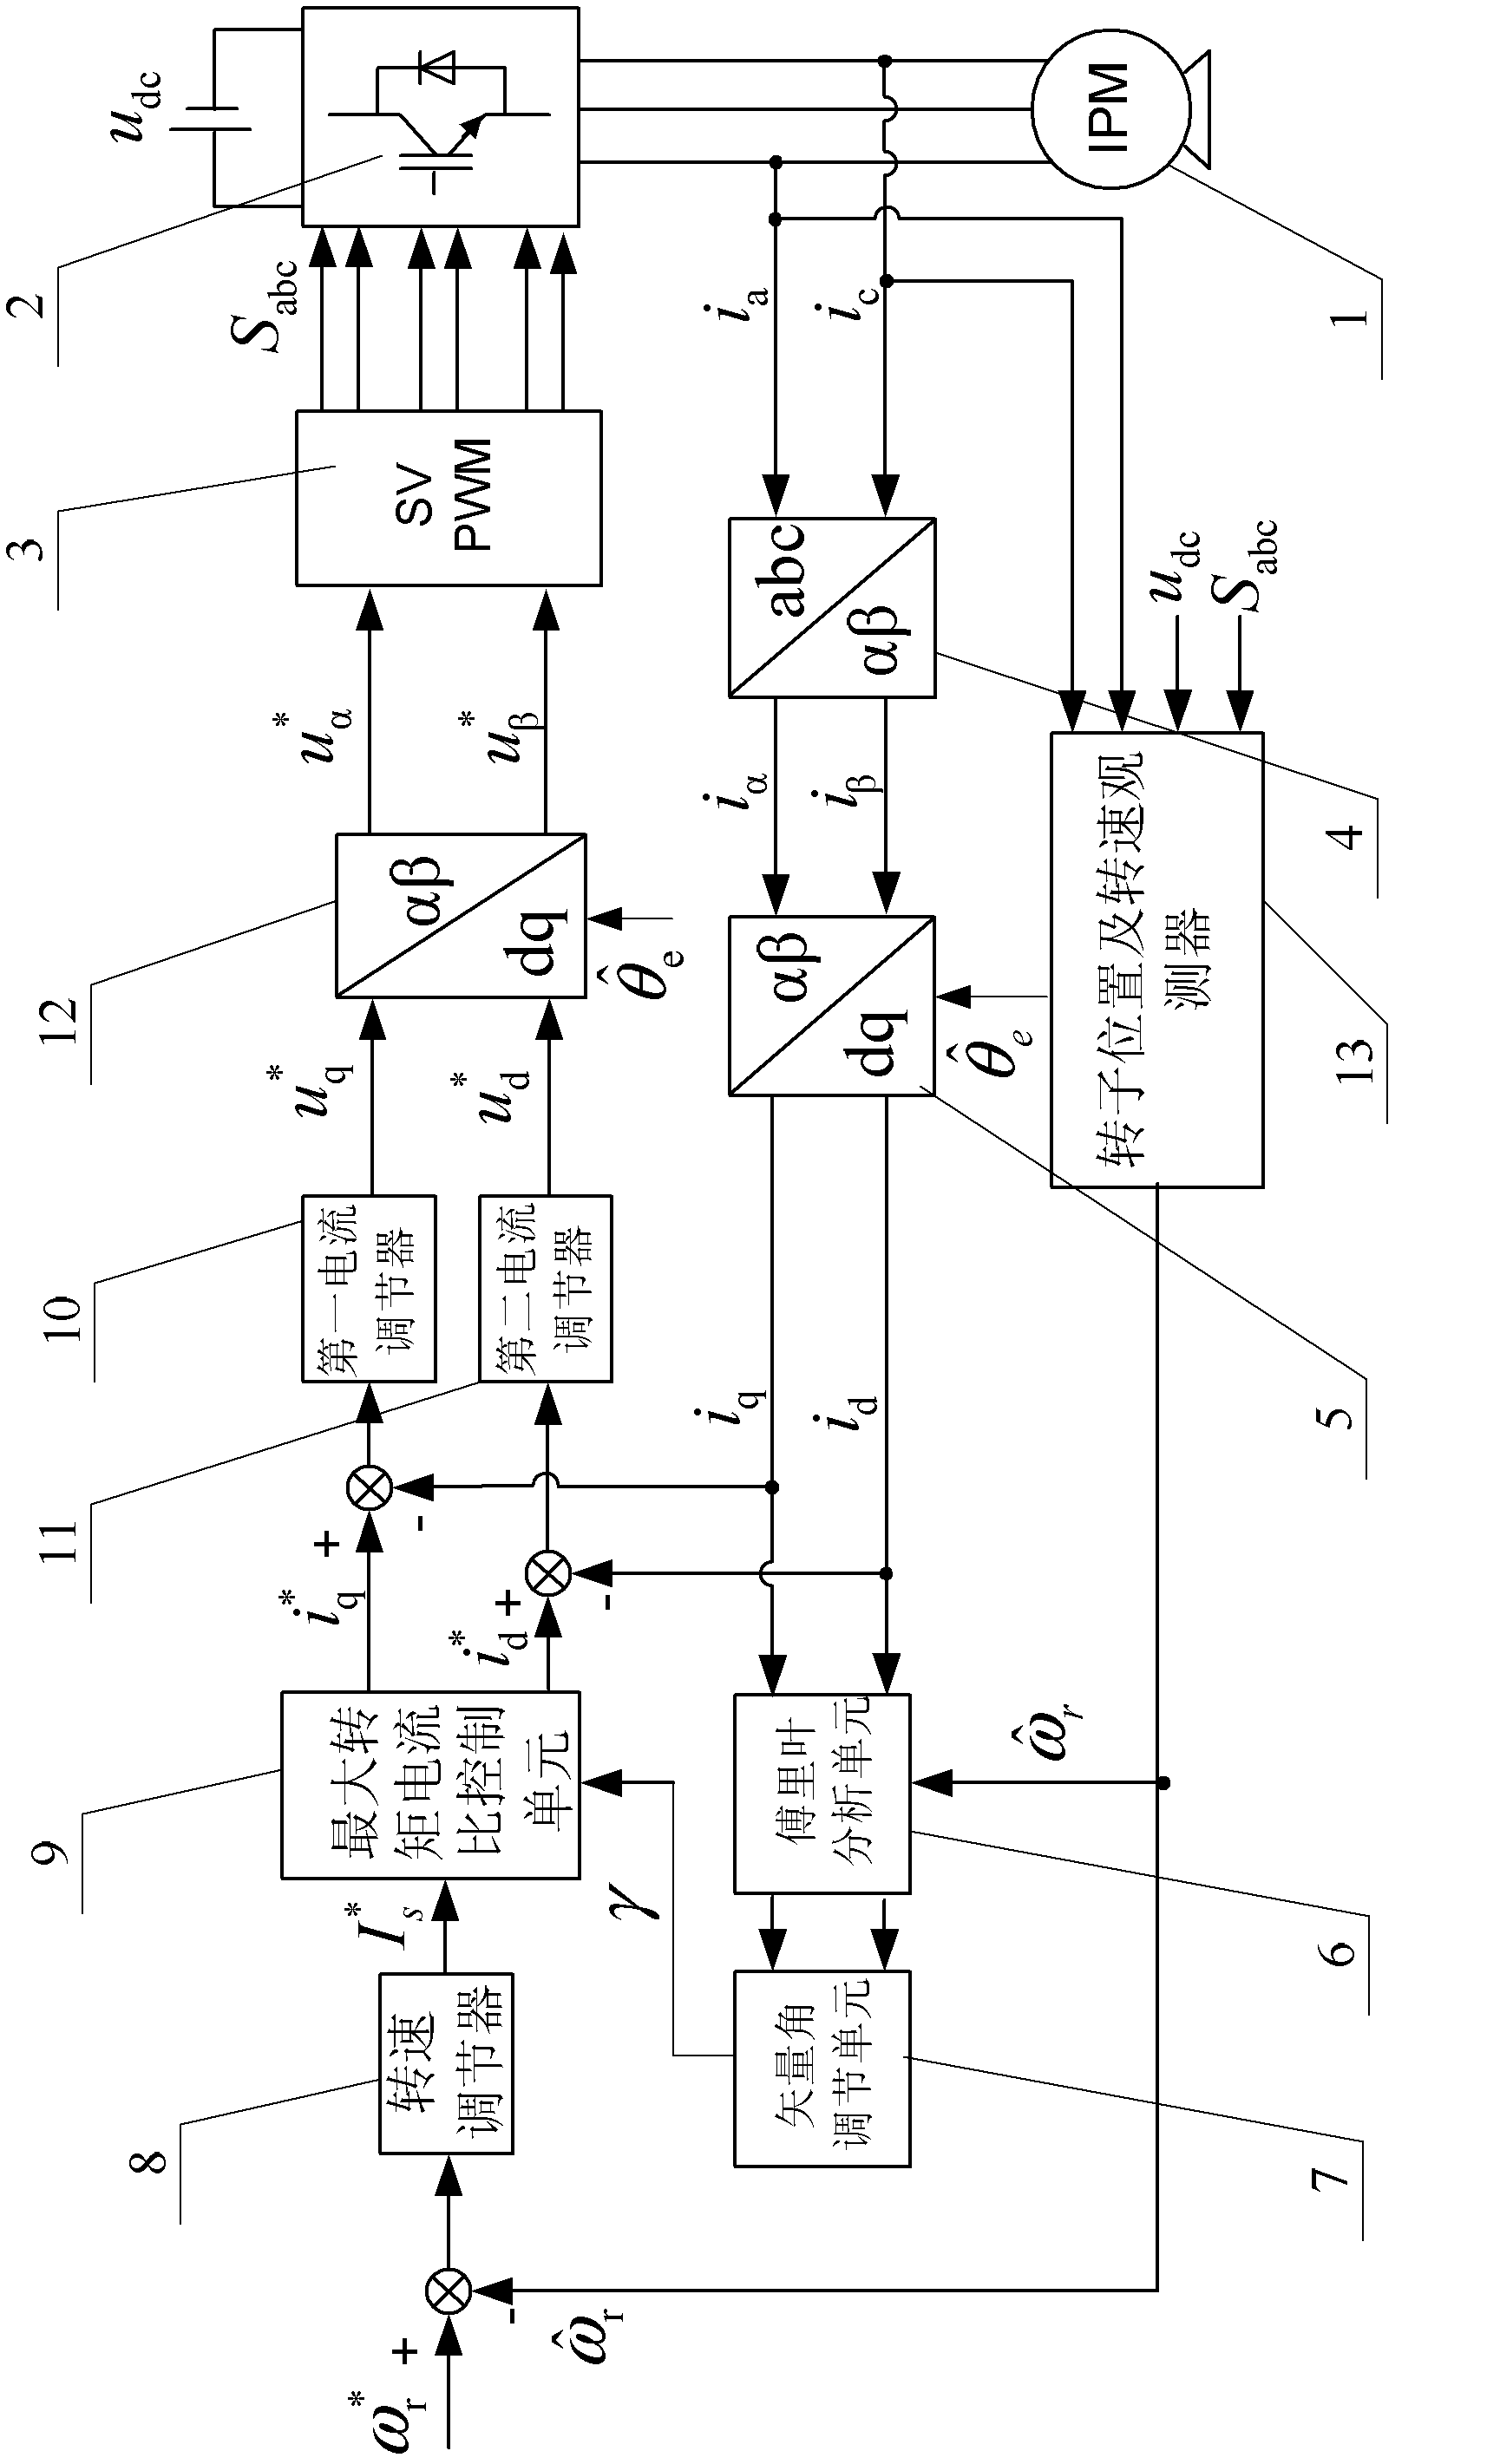 Maximum torque per ampere vector control system and control method for position sensor-free internal permanent magnet synchronous motor